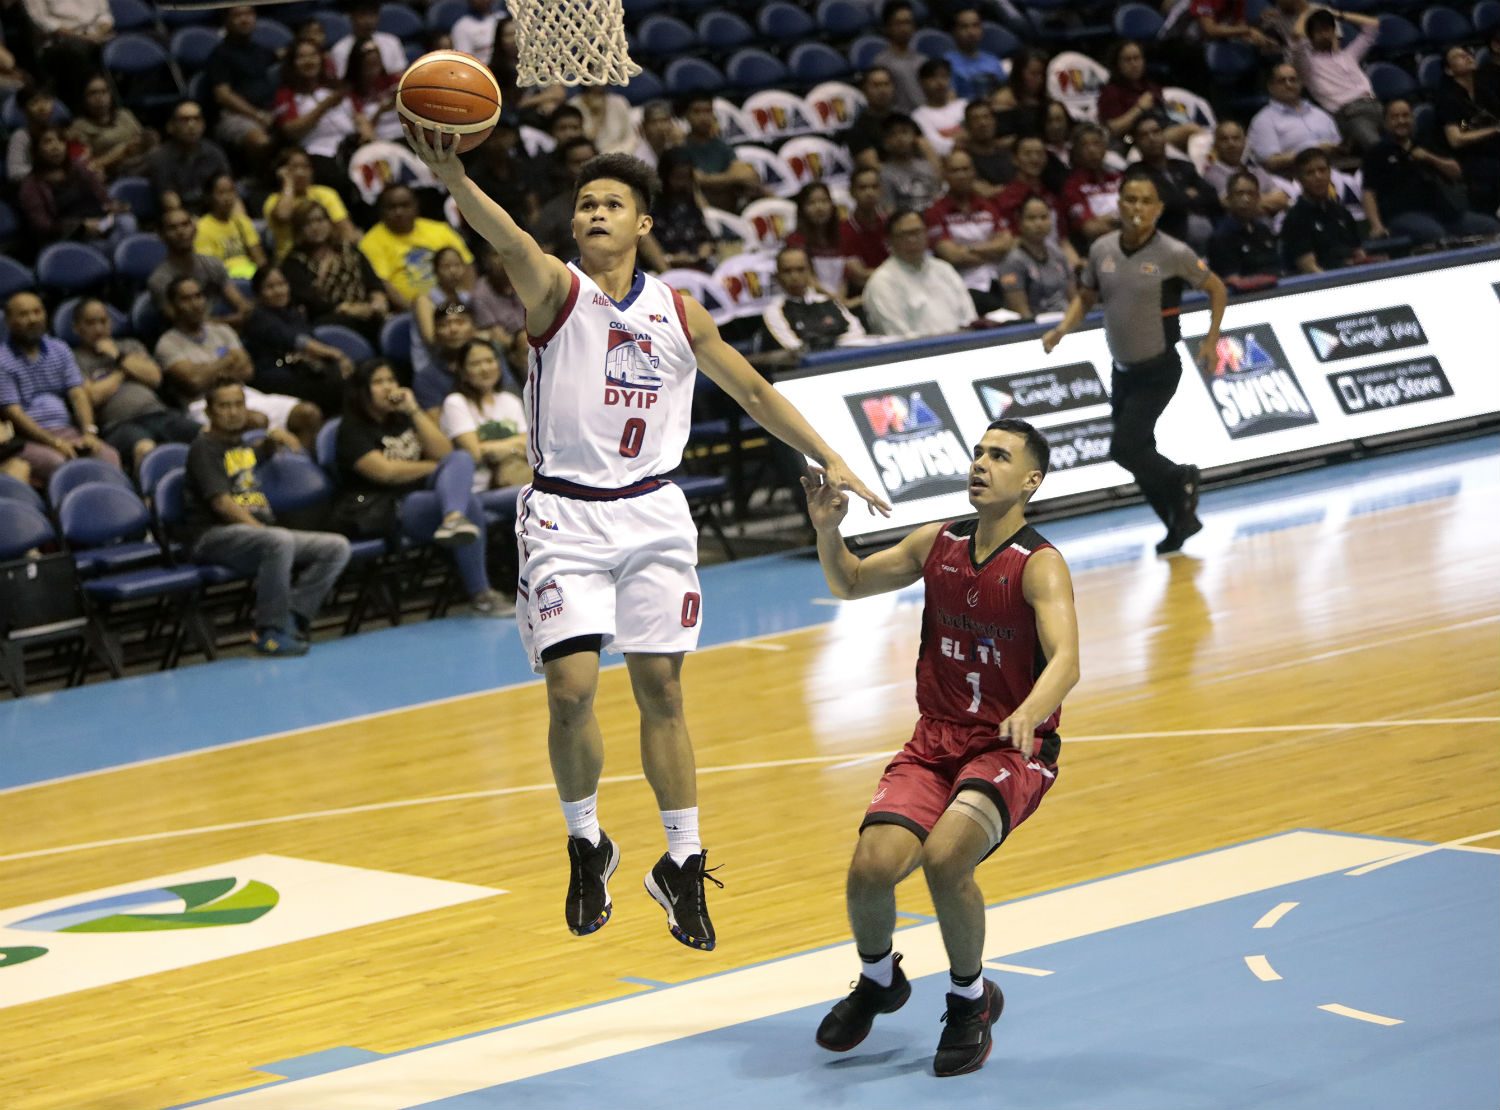 Fresh-look Columbian routs Blackwater by 28 in PBA Commissioner’s Cup opener